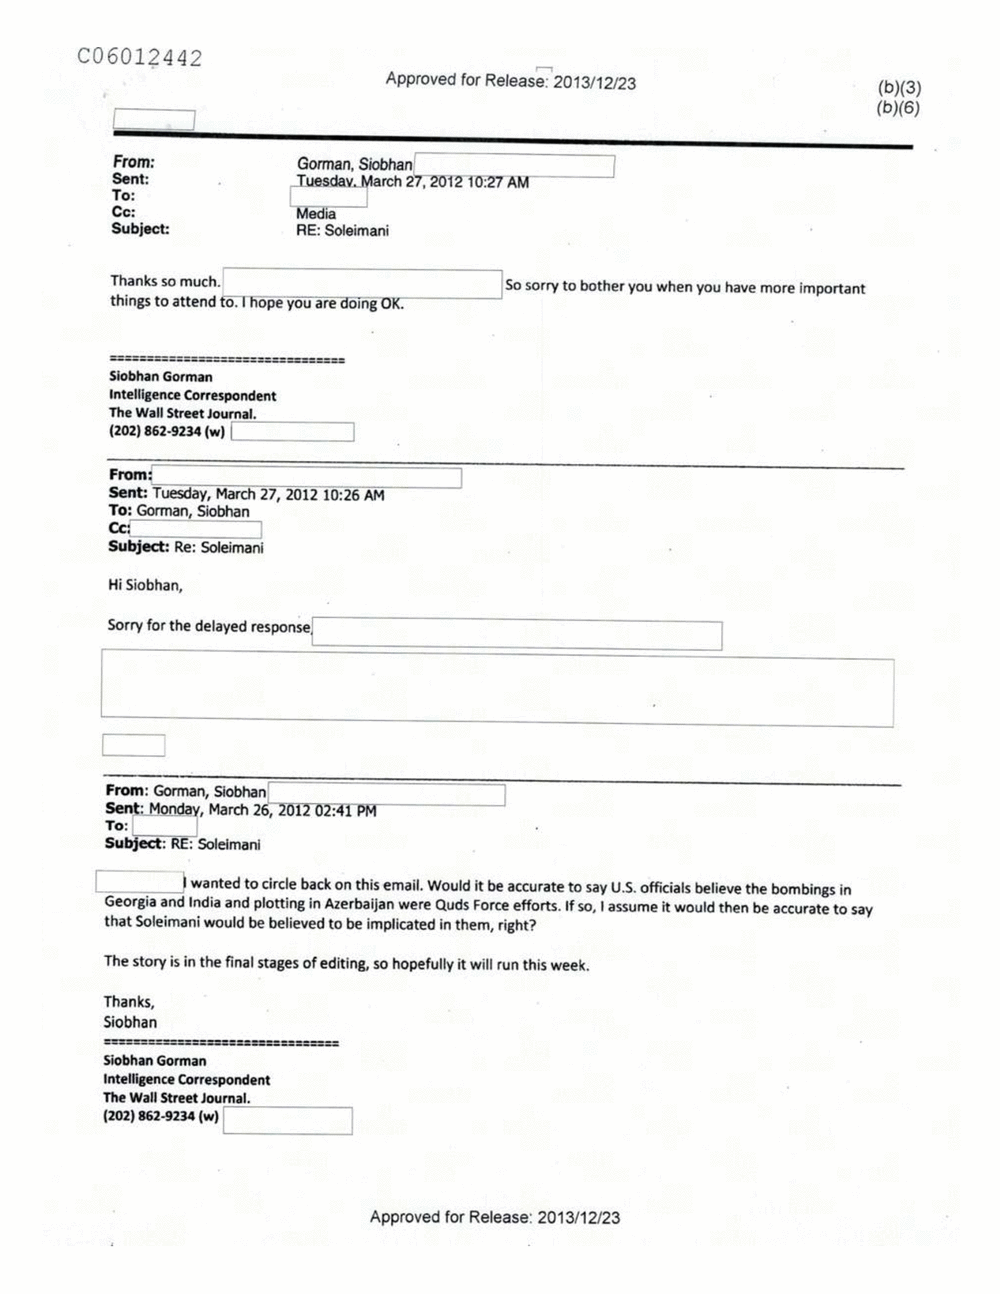 Page 27 from Email Correspondence Between Reporters and CIA Flacks